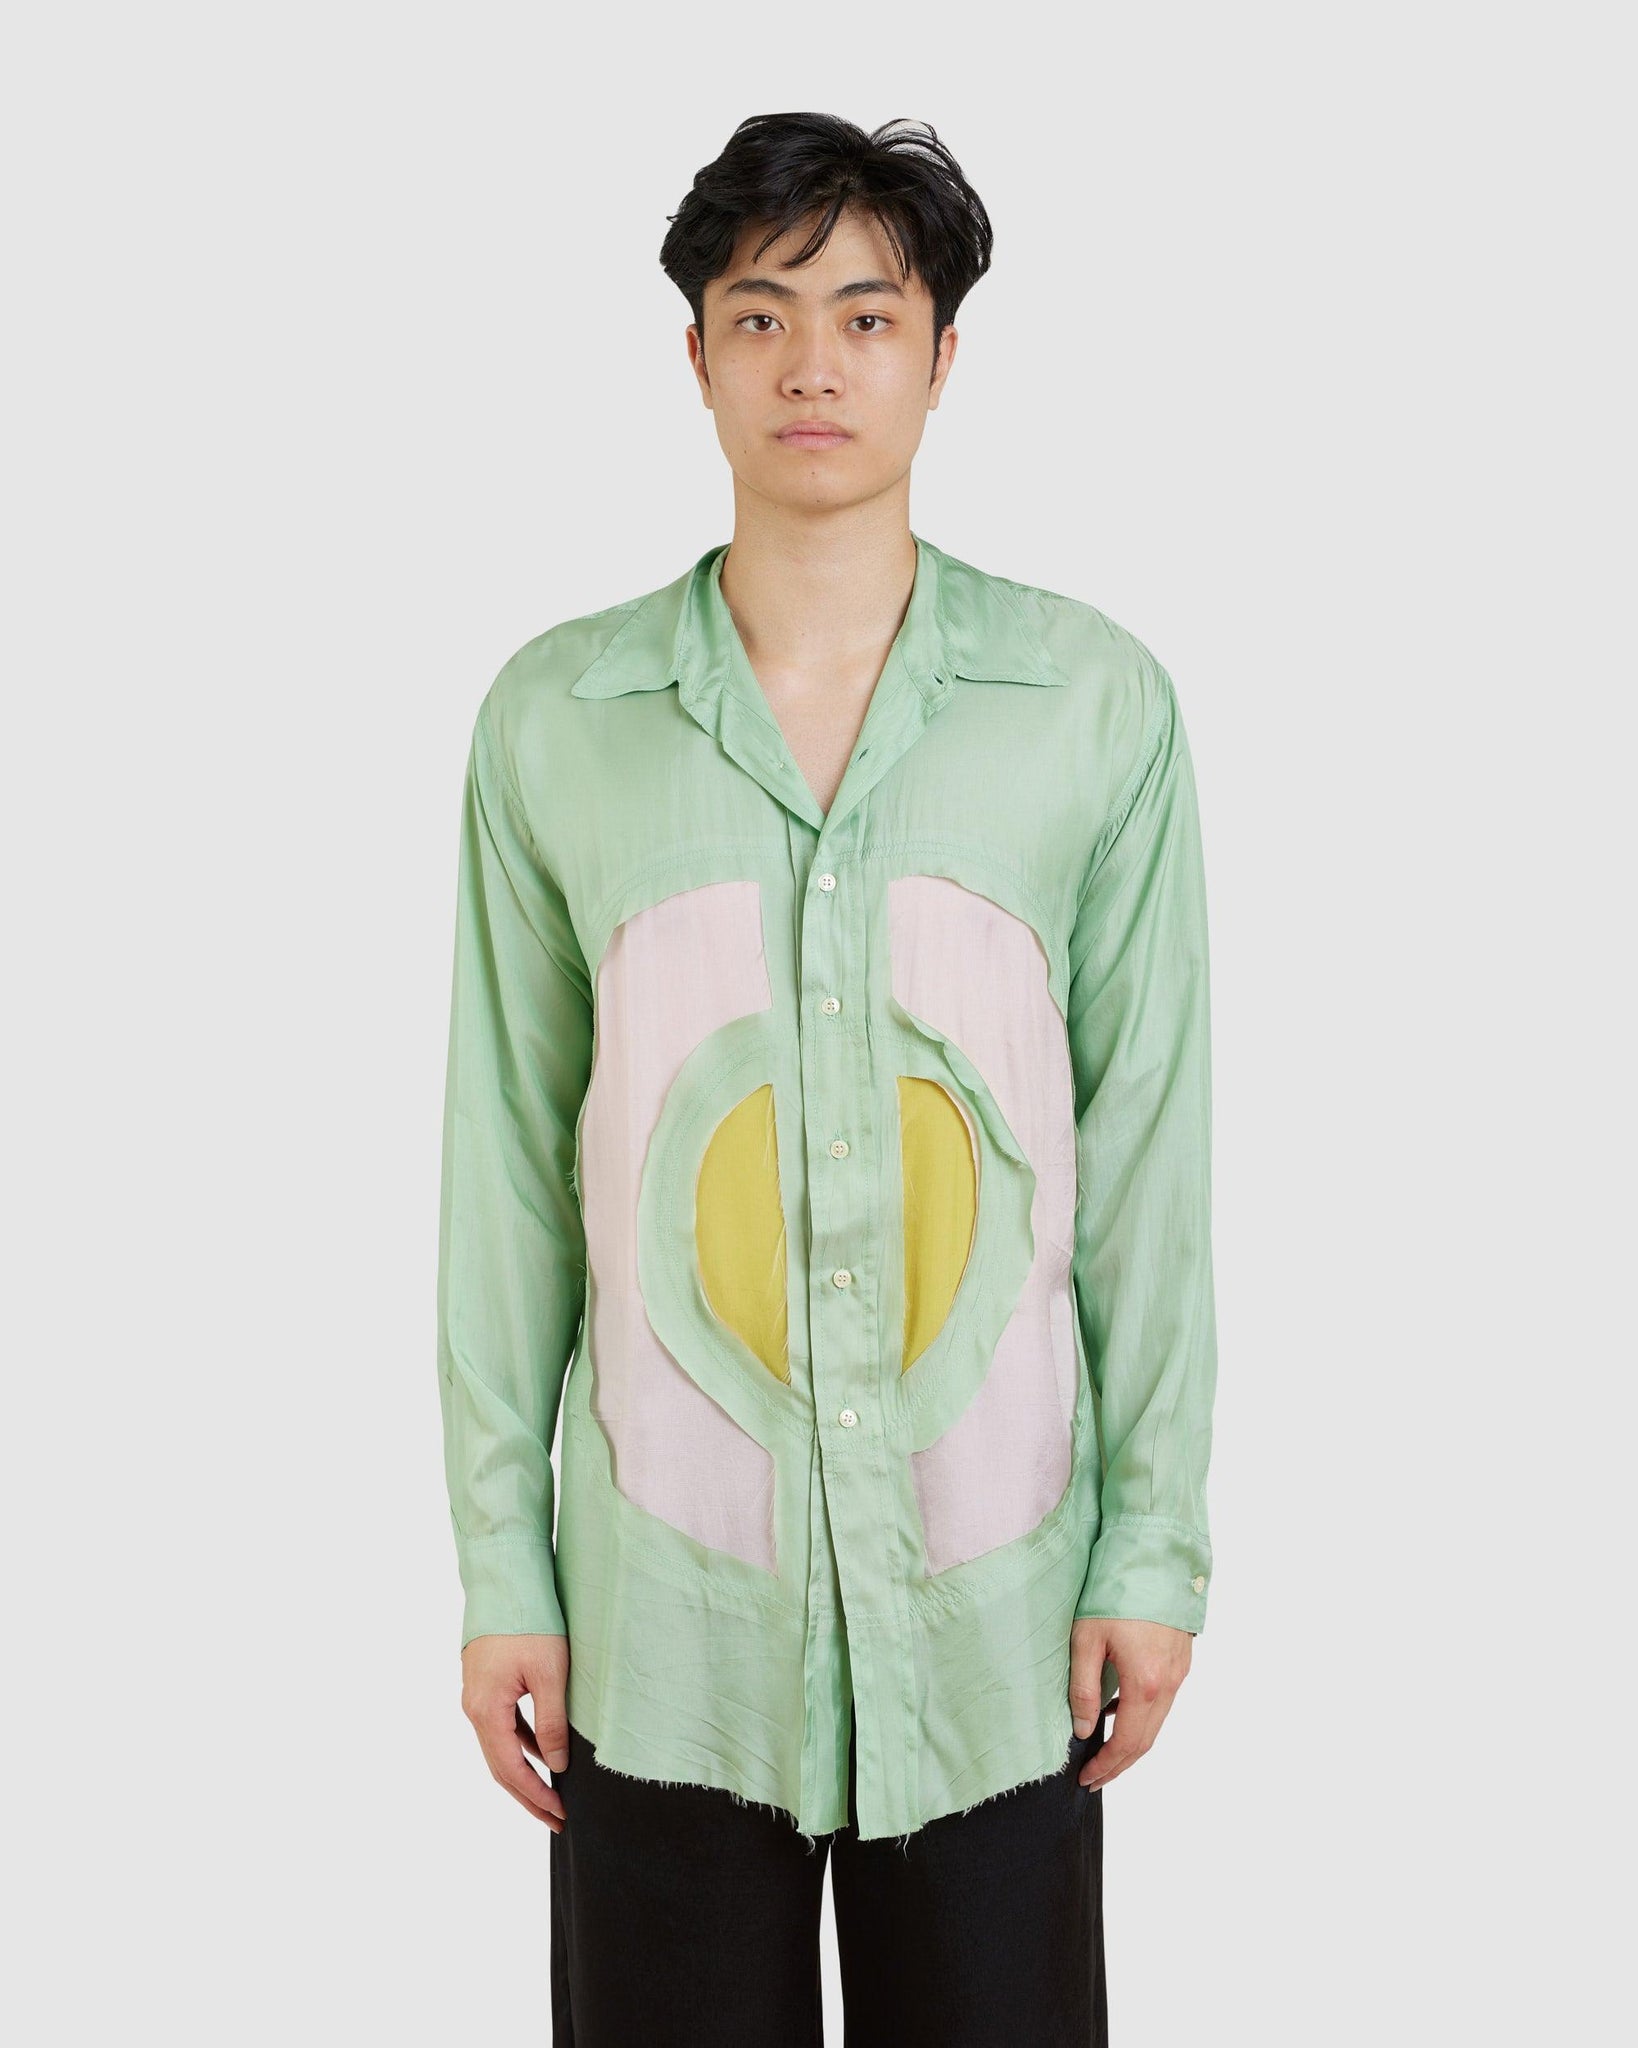 Vortex Shirt - {{ collection.title }} - Chinatown Country Club 